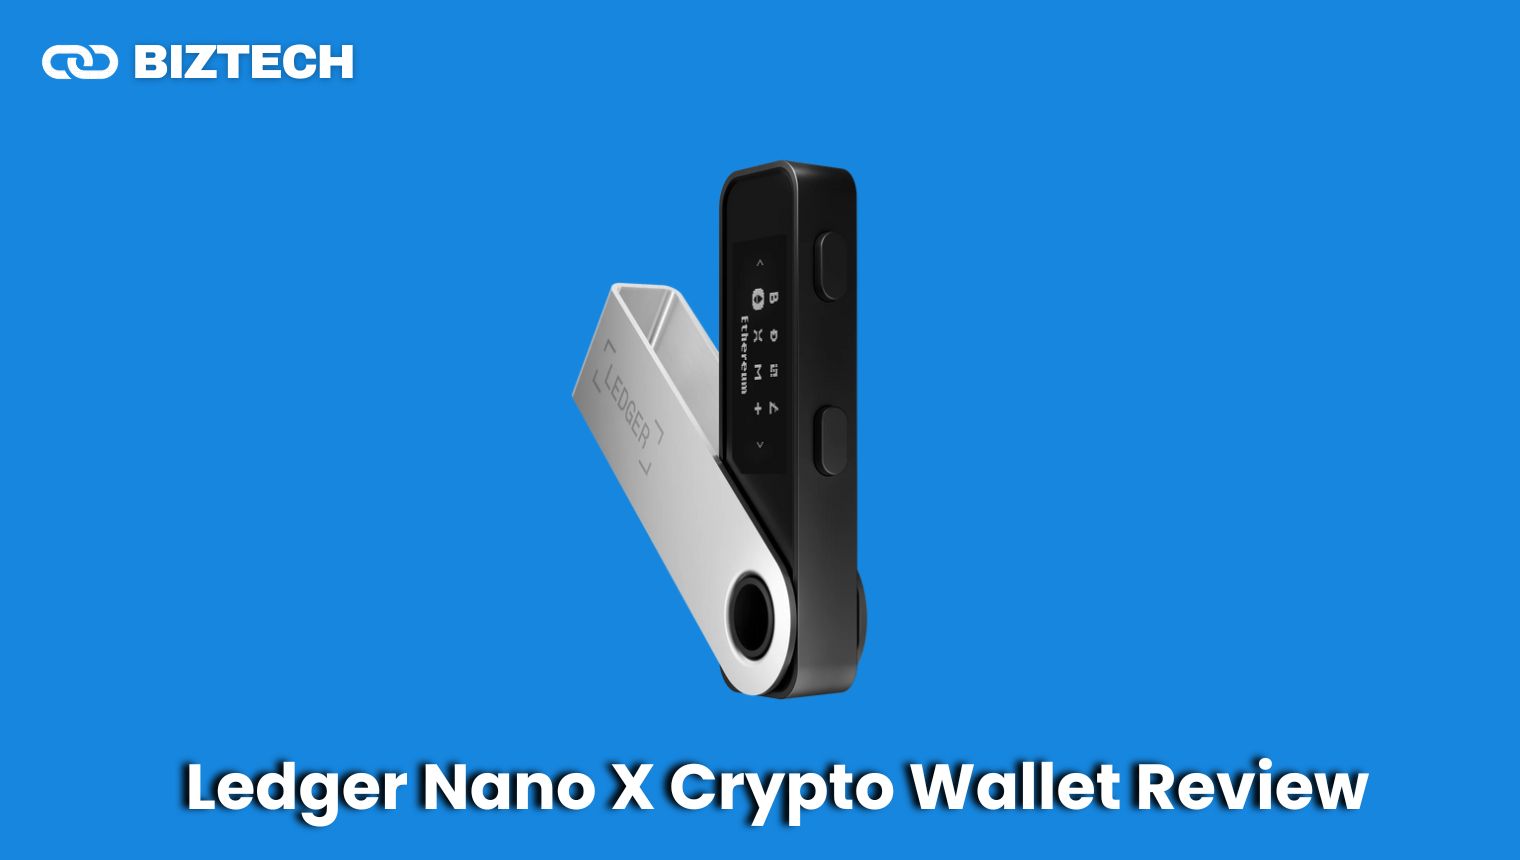 Ledger Nano X Wallet Review: Is It the Best Crypto Storage Solution?